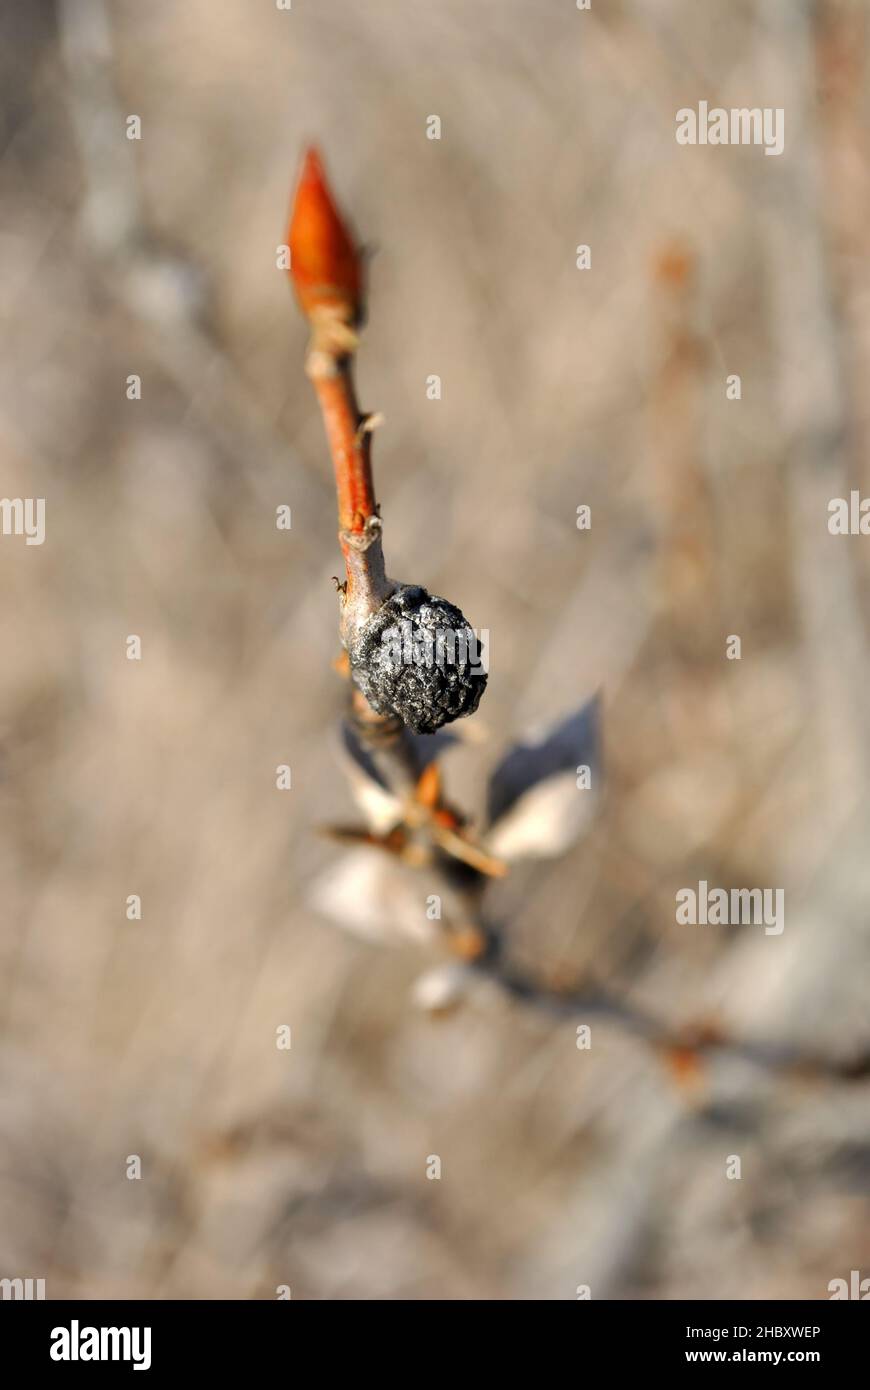 Poplar twig with young white buds and gray dry leaf, soft blurry brown  background,  sunny spring day Stock Photo